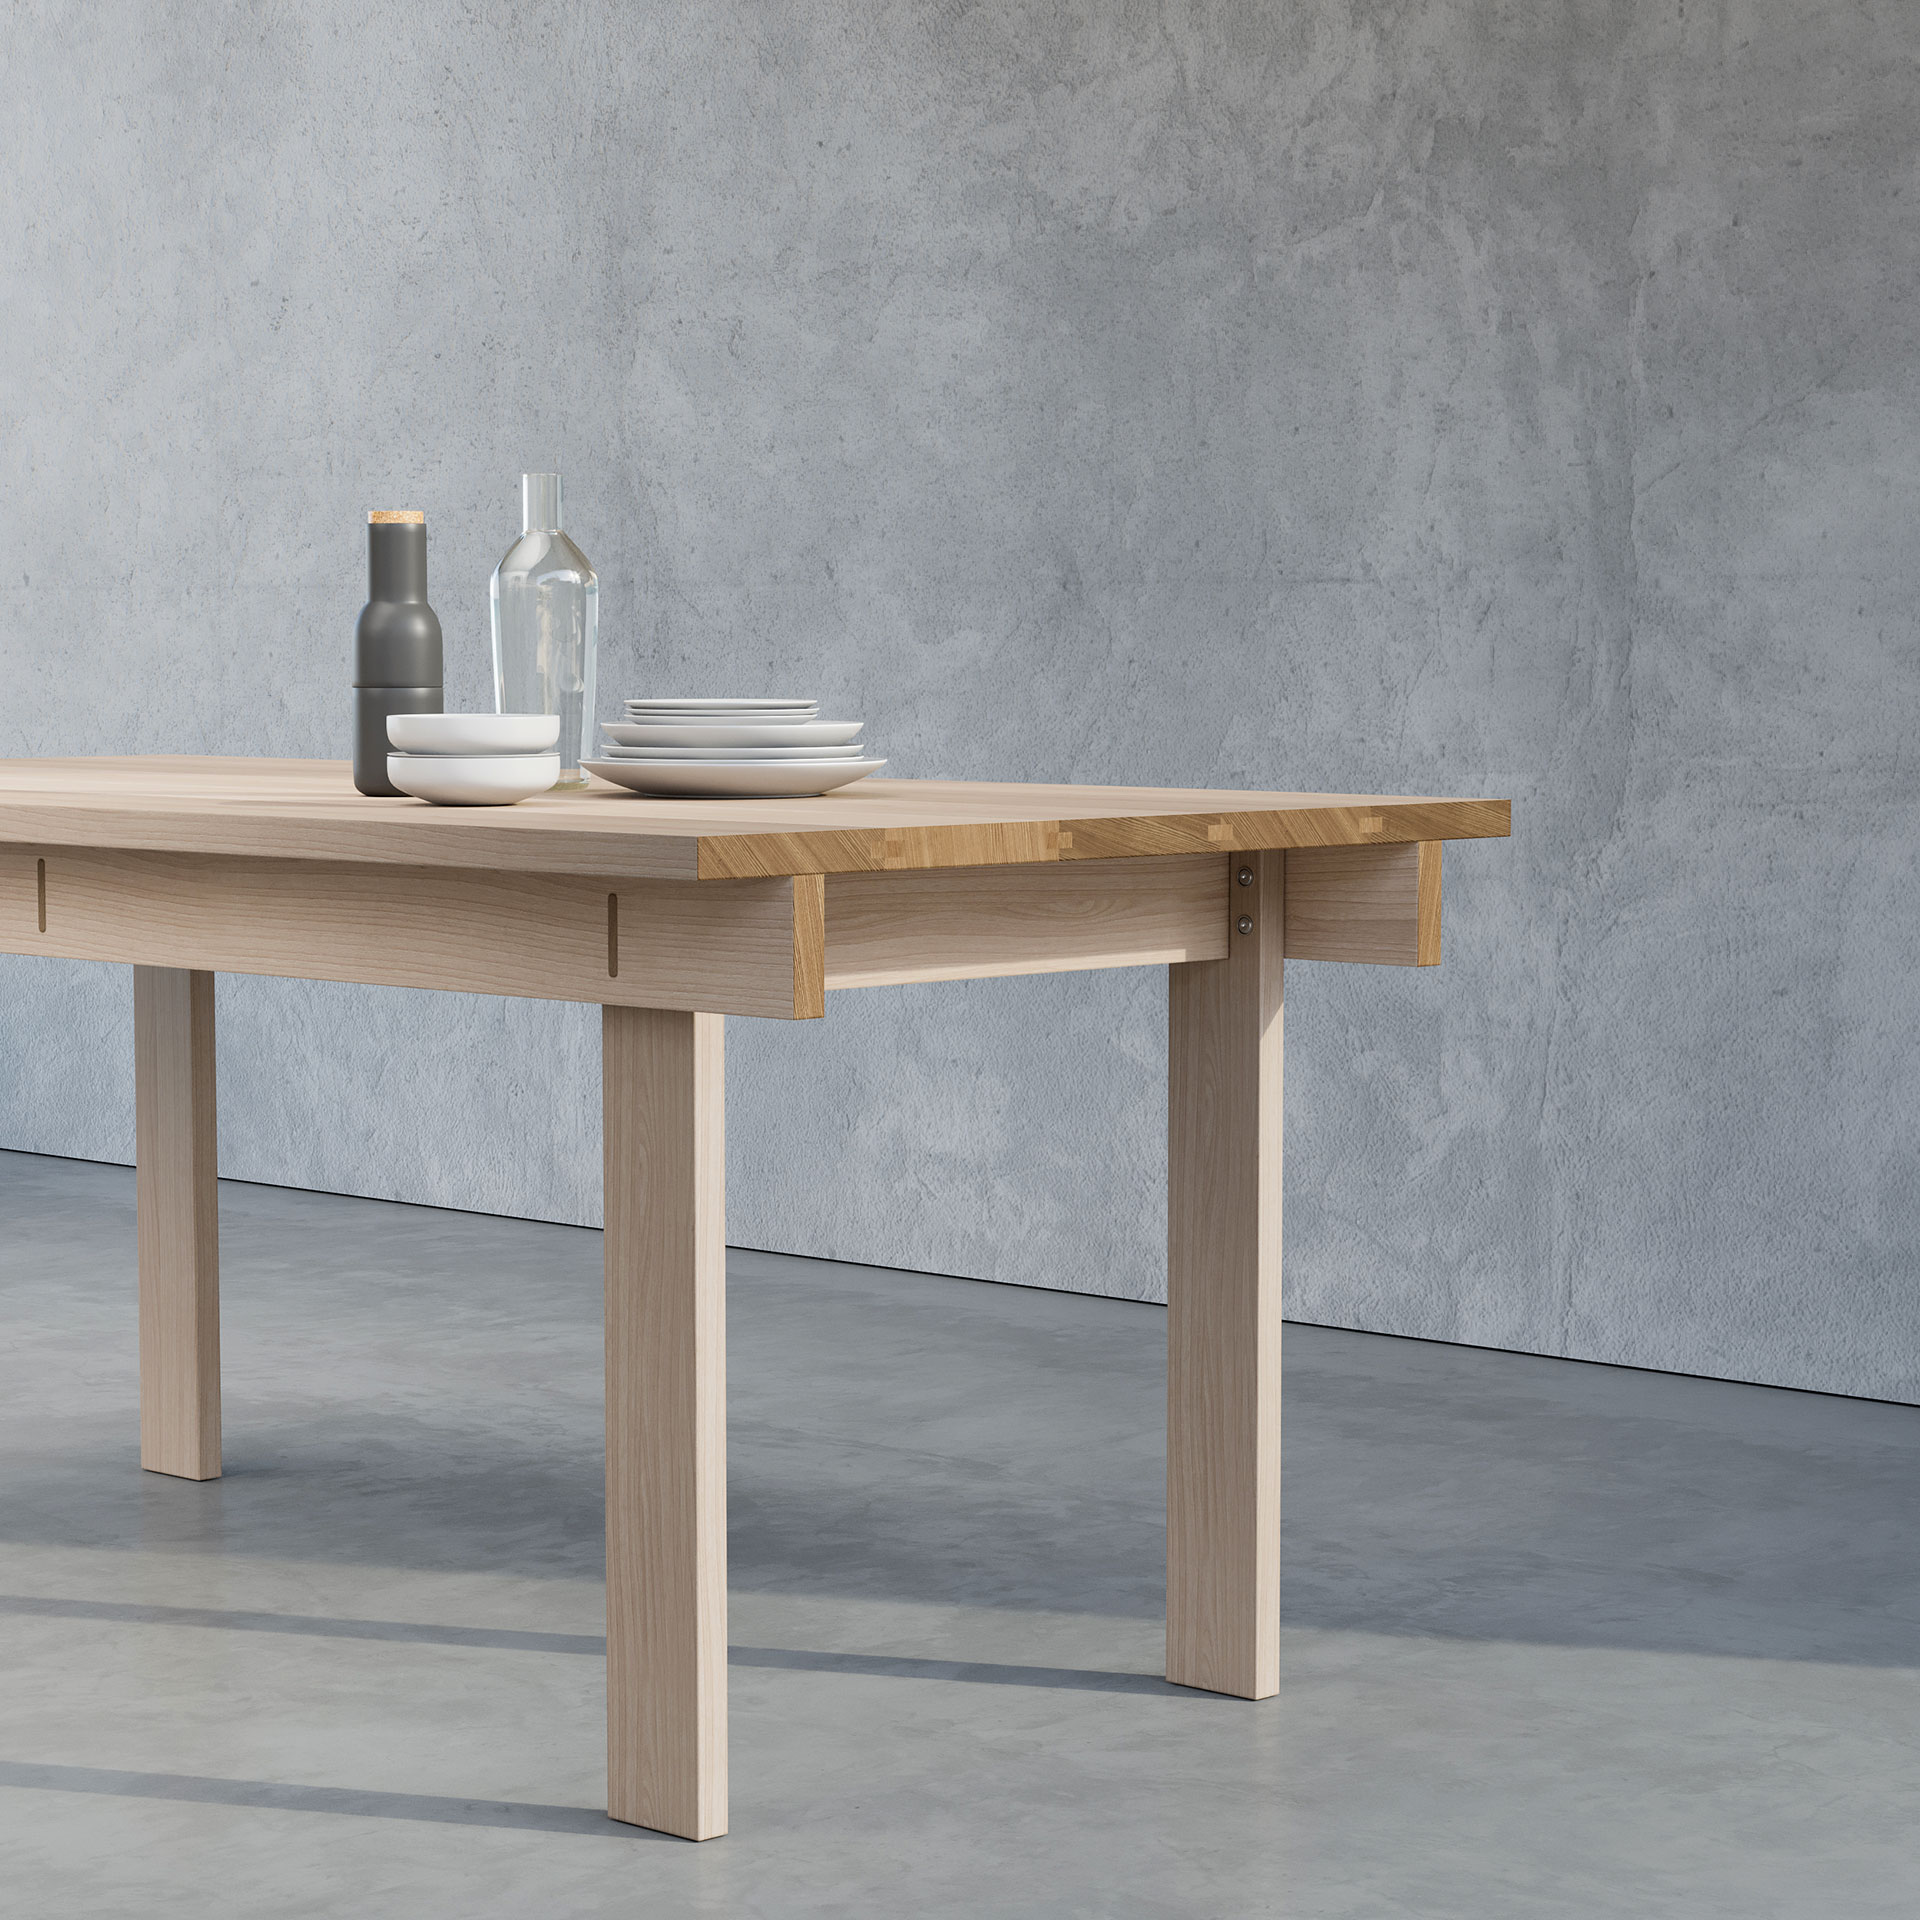 TABLE SERIES ROXO is made from durable and solid wood